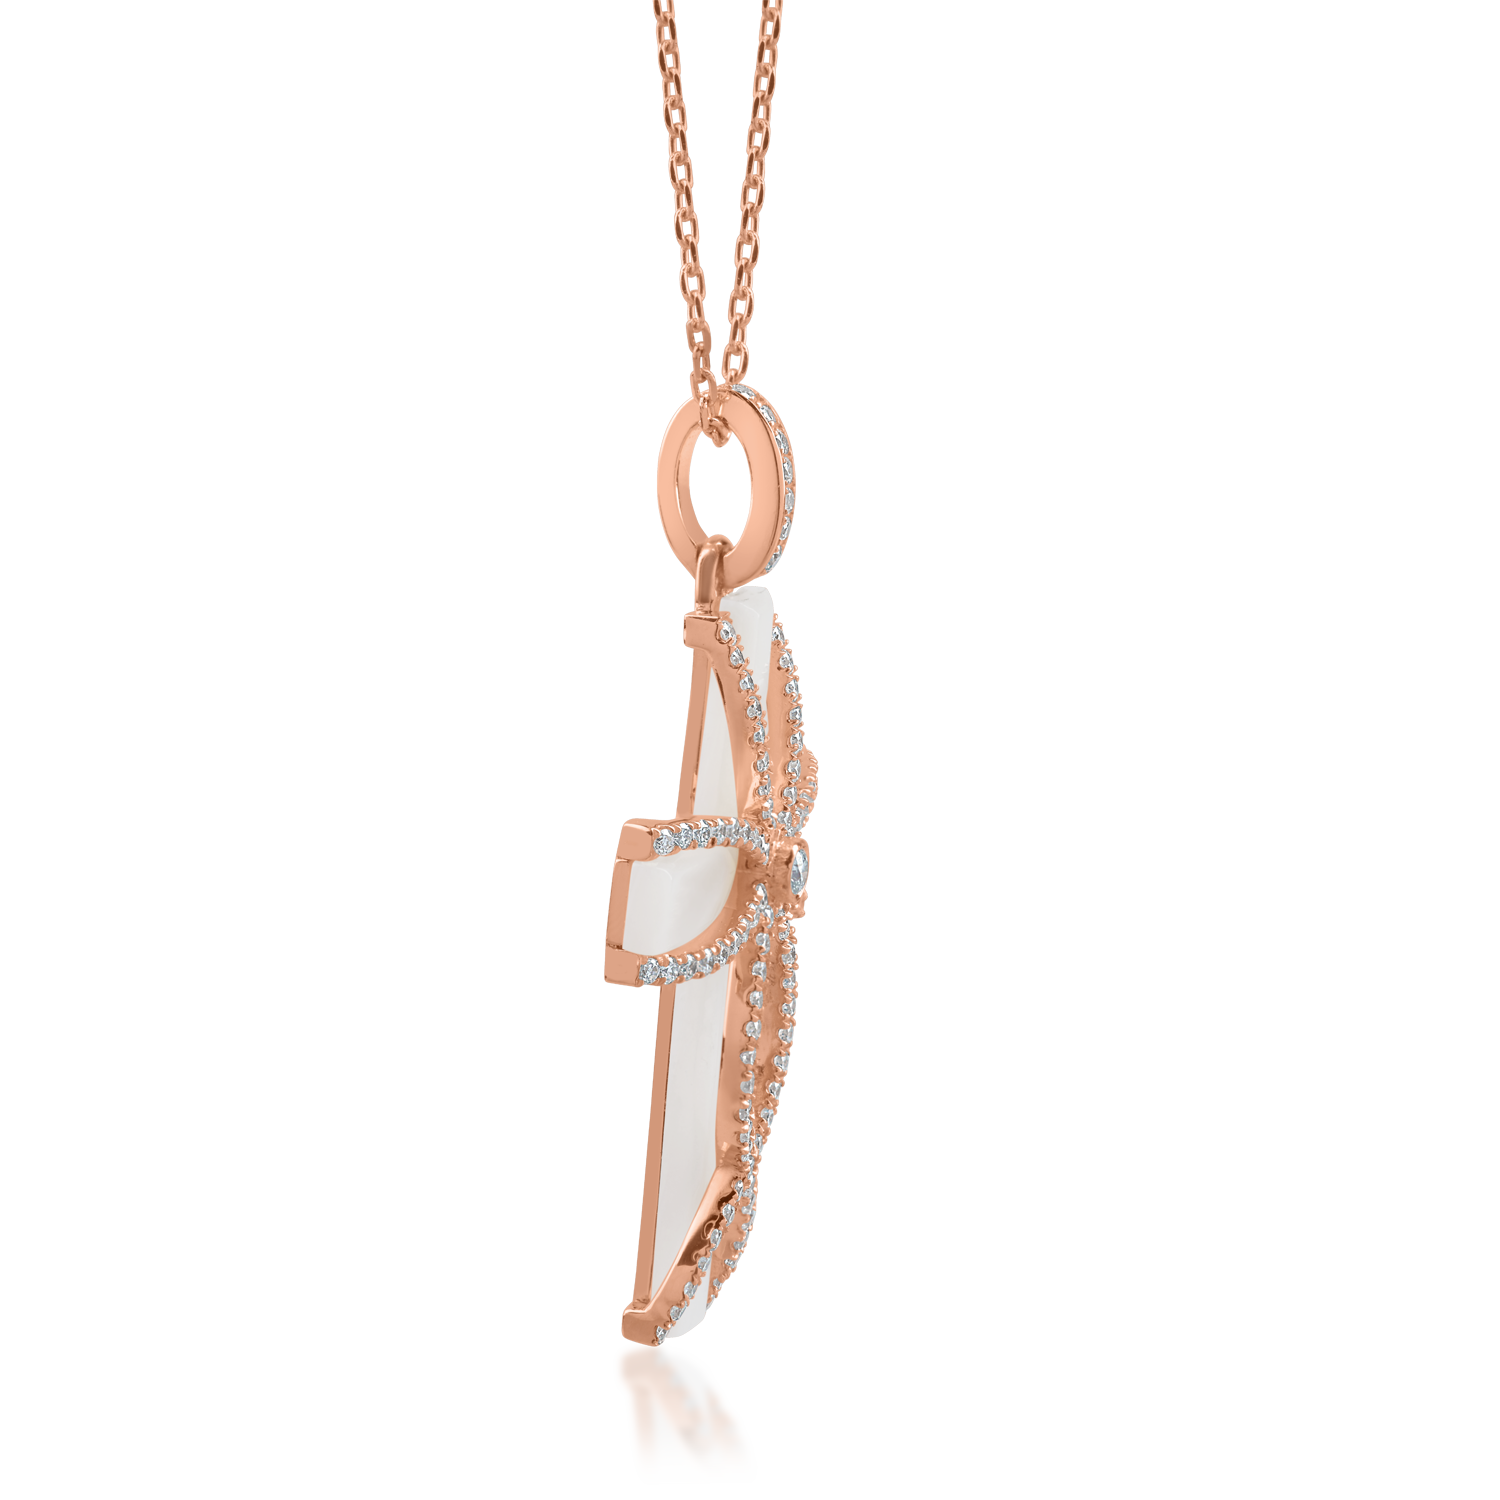 Rose gold cross pendant necklace with 2.1ct mother of pearl and 0.31ct diamonds